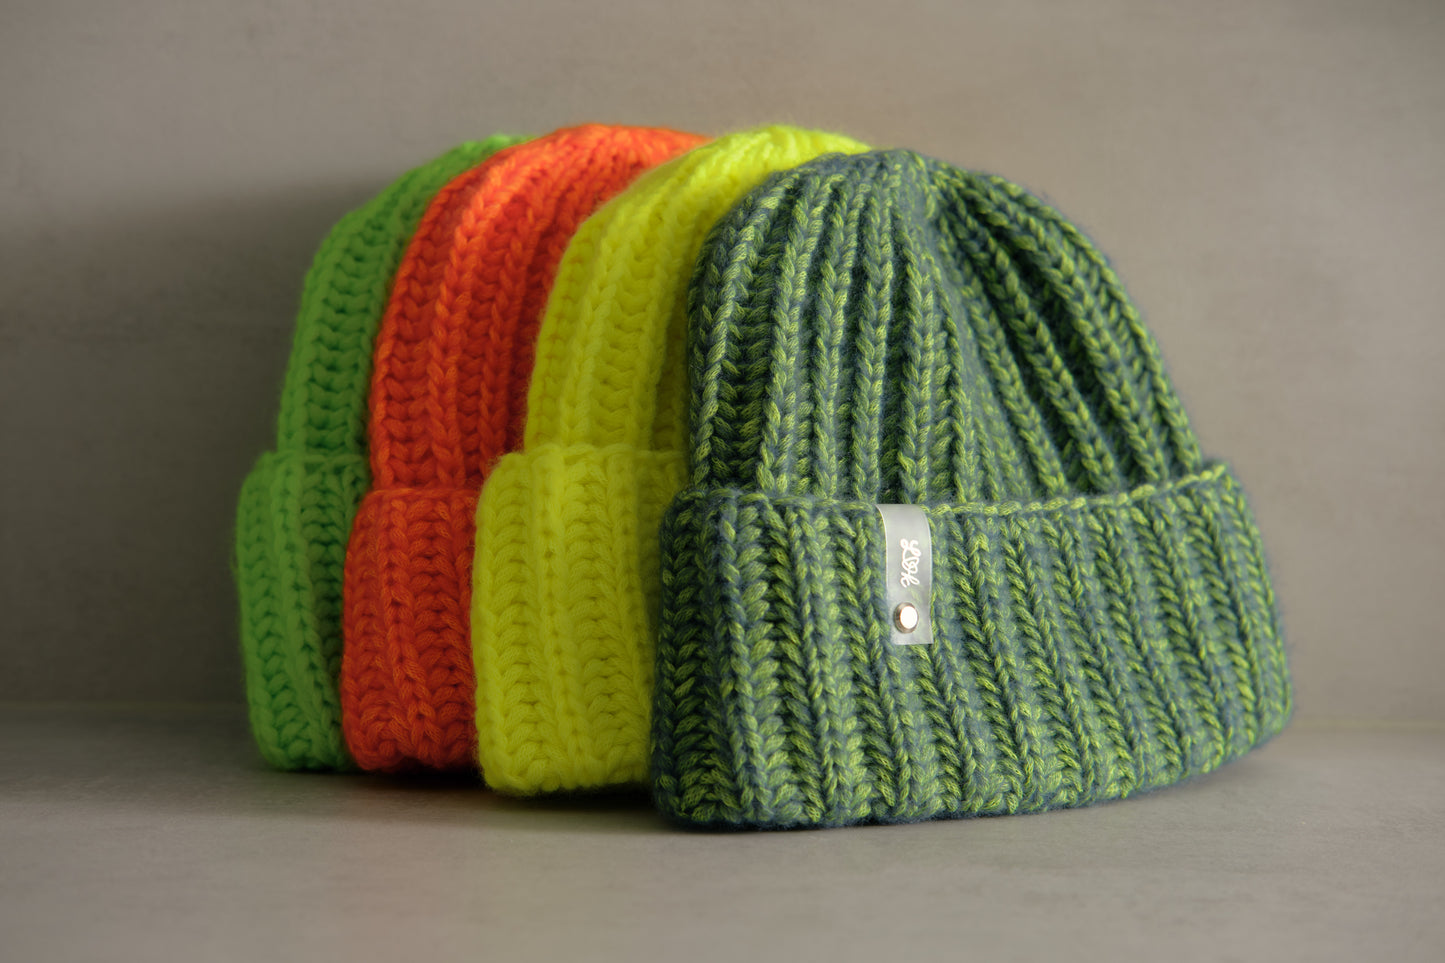 Hand-knitted hat in neon colors